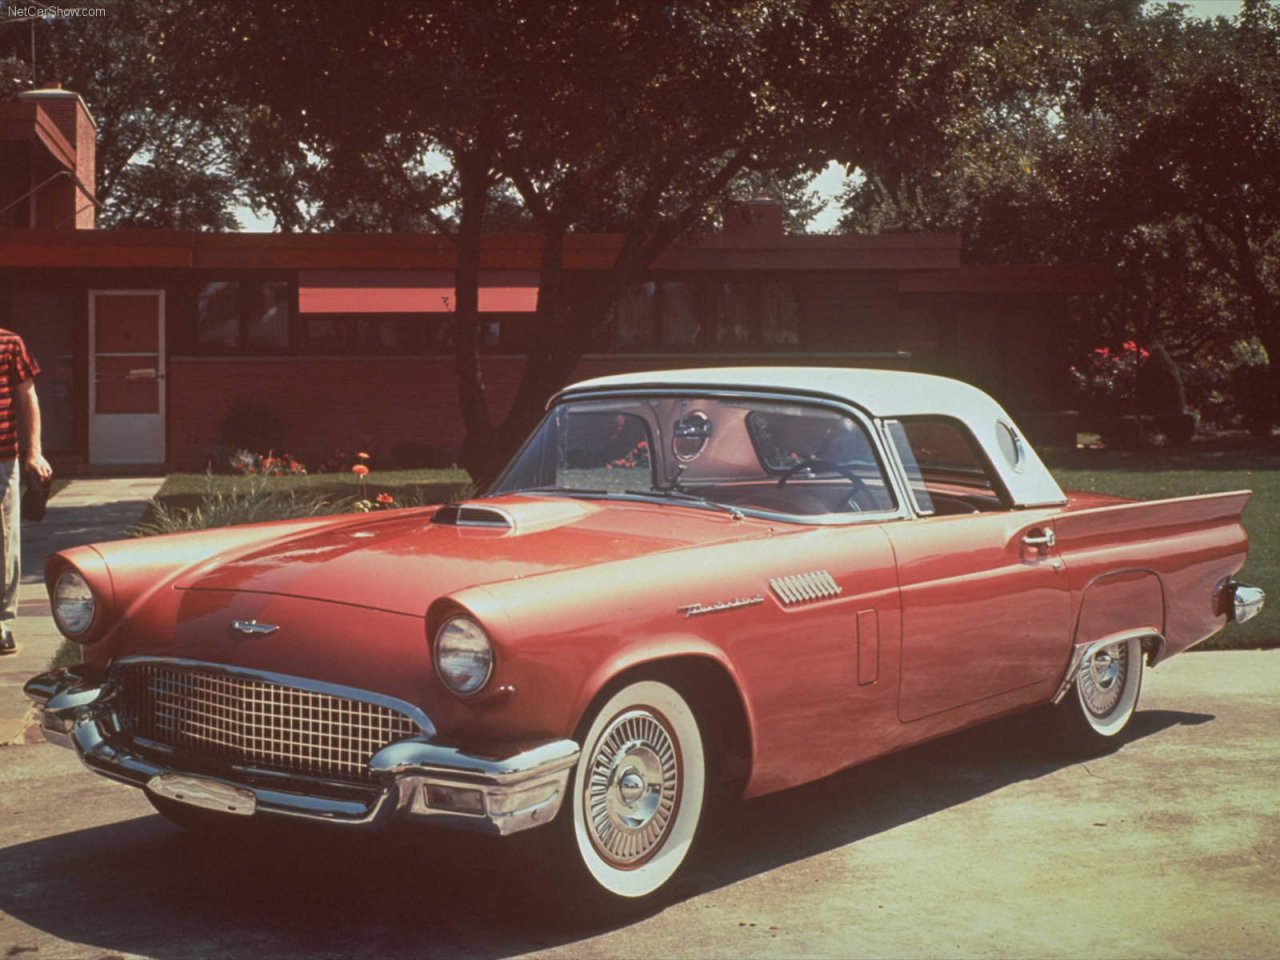 Image of Ford Thunderbird Supercharged